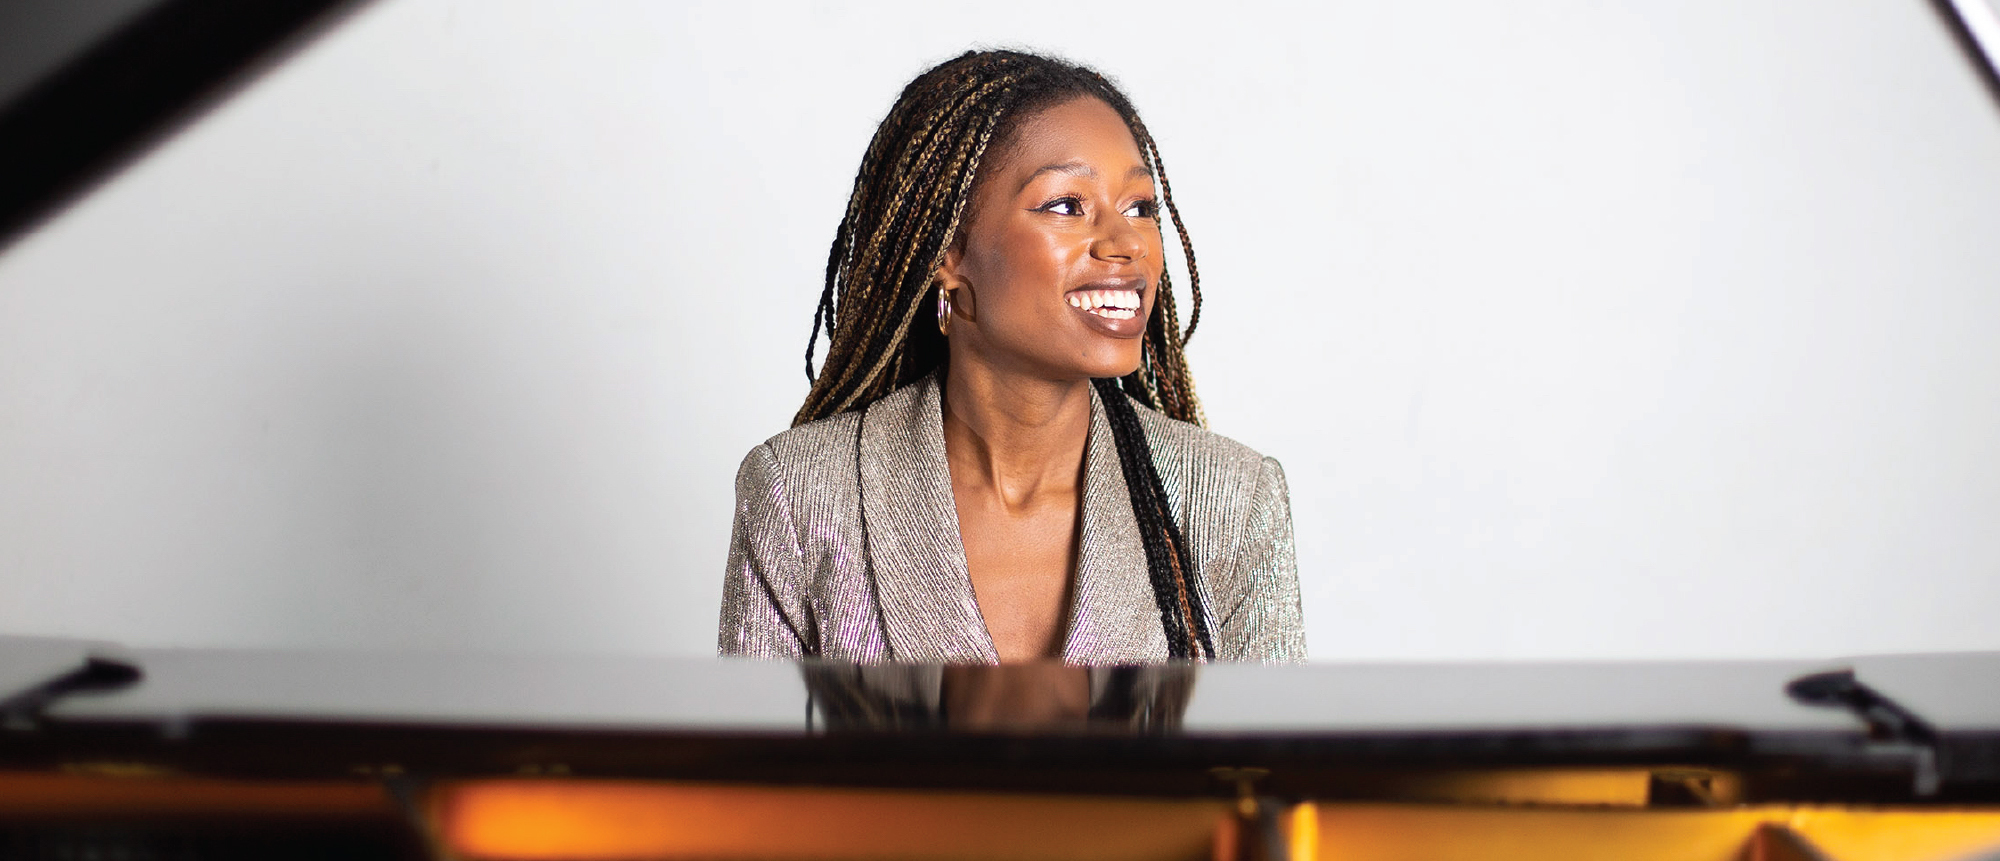 Isata Kanneh-Mason sitting in front of a piano, smiling and looking aside.